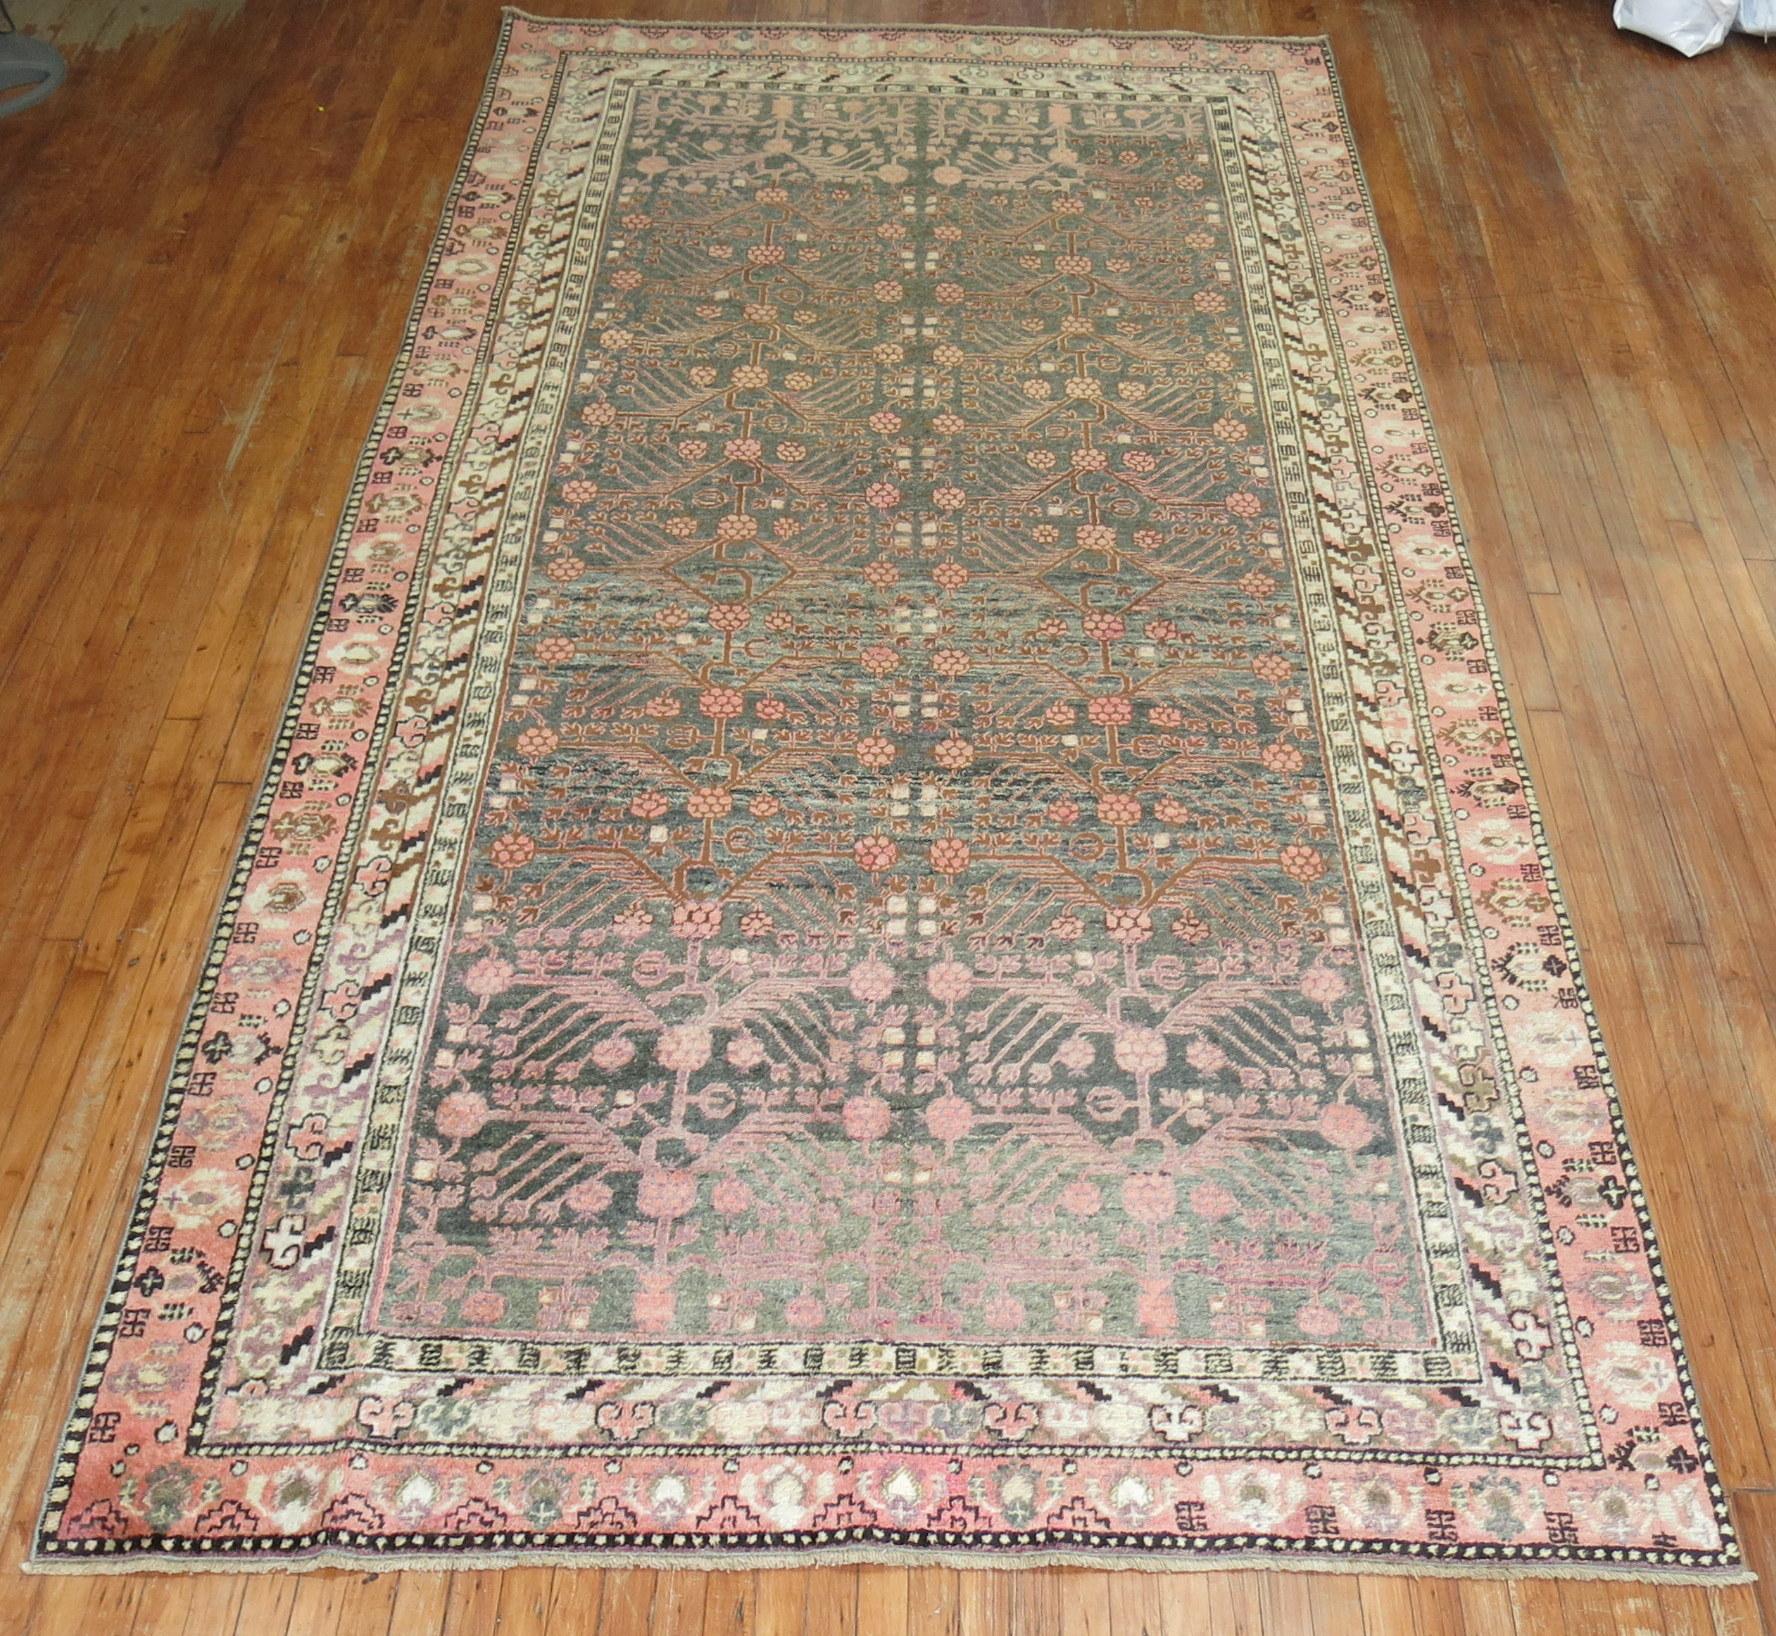 A high Decorative Khotan Gallery size rug with a pomegranate motif on a gray field. Overall even medium pile condition

circa 1920, measures: 6'7